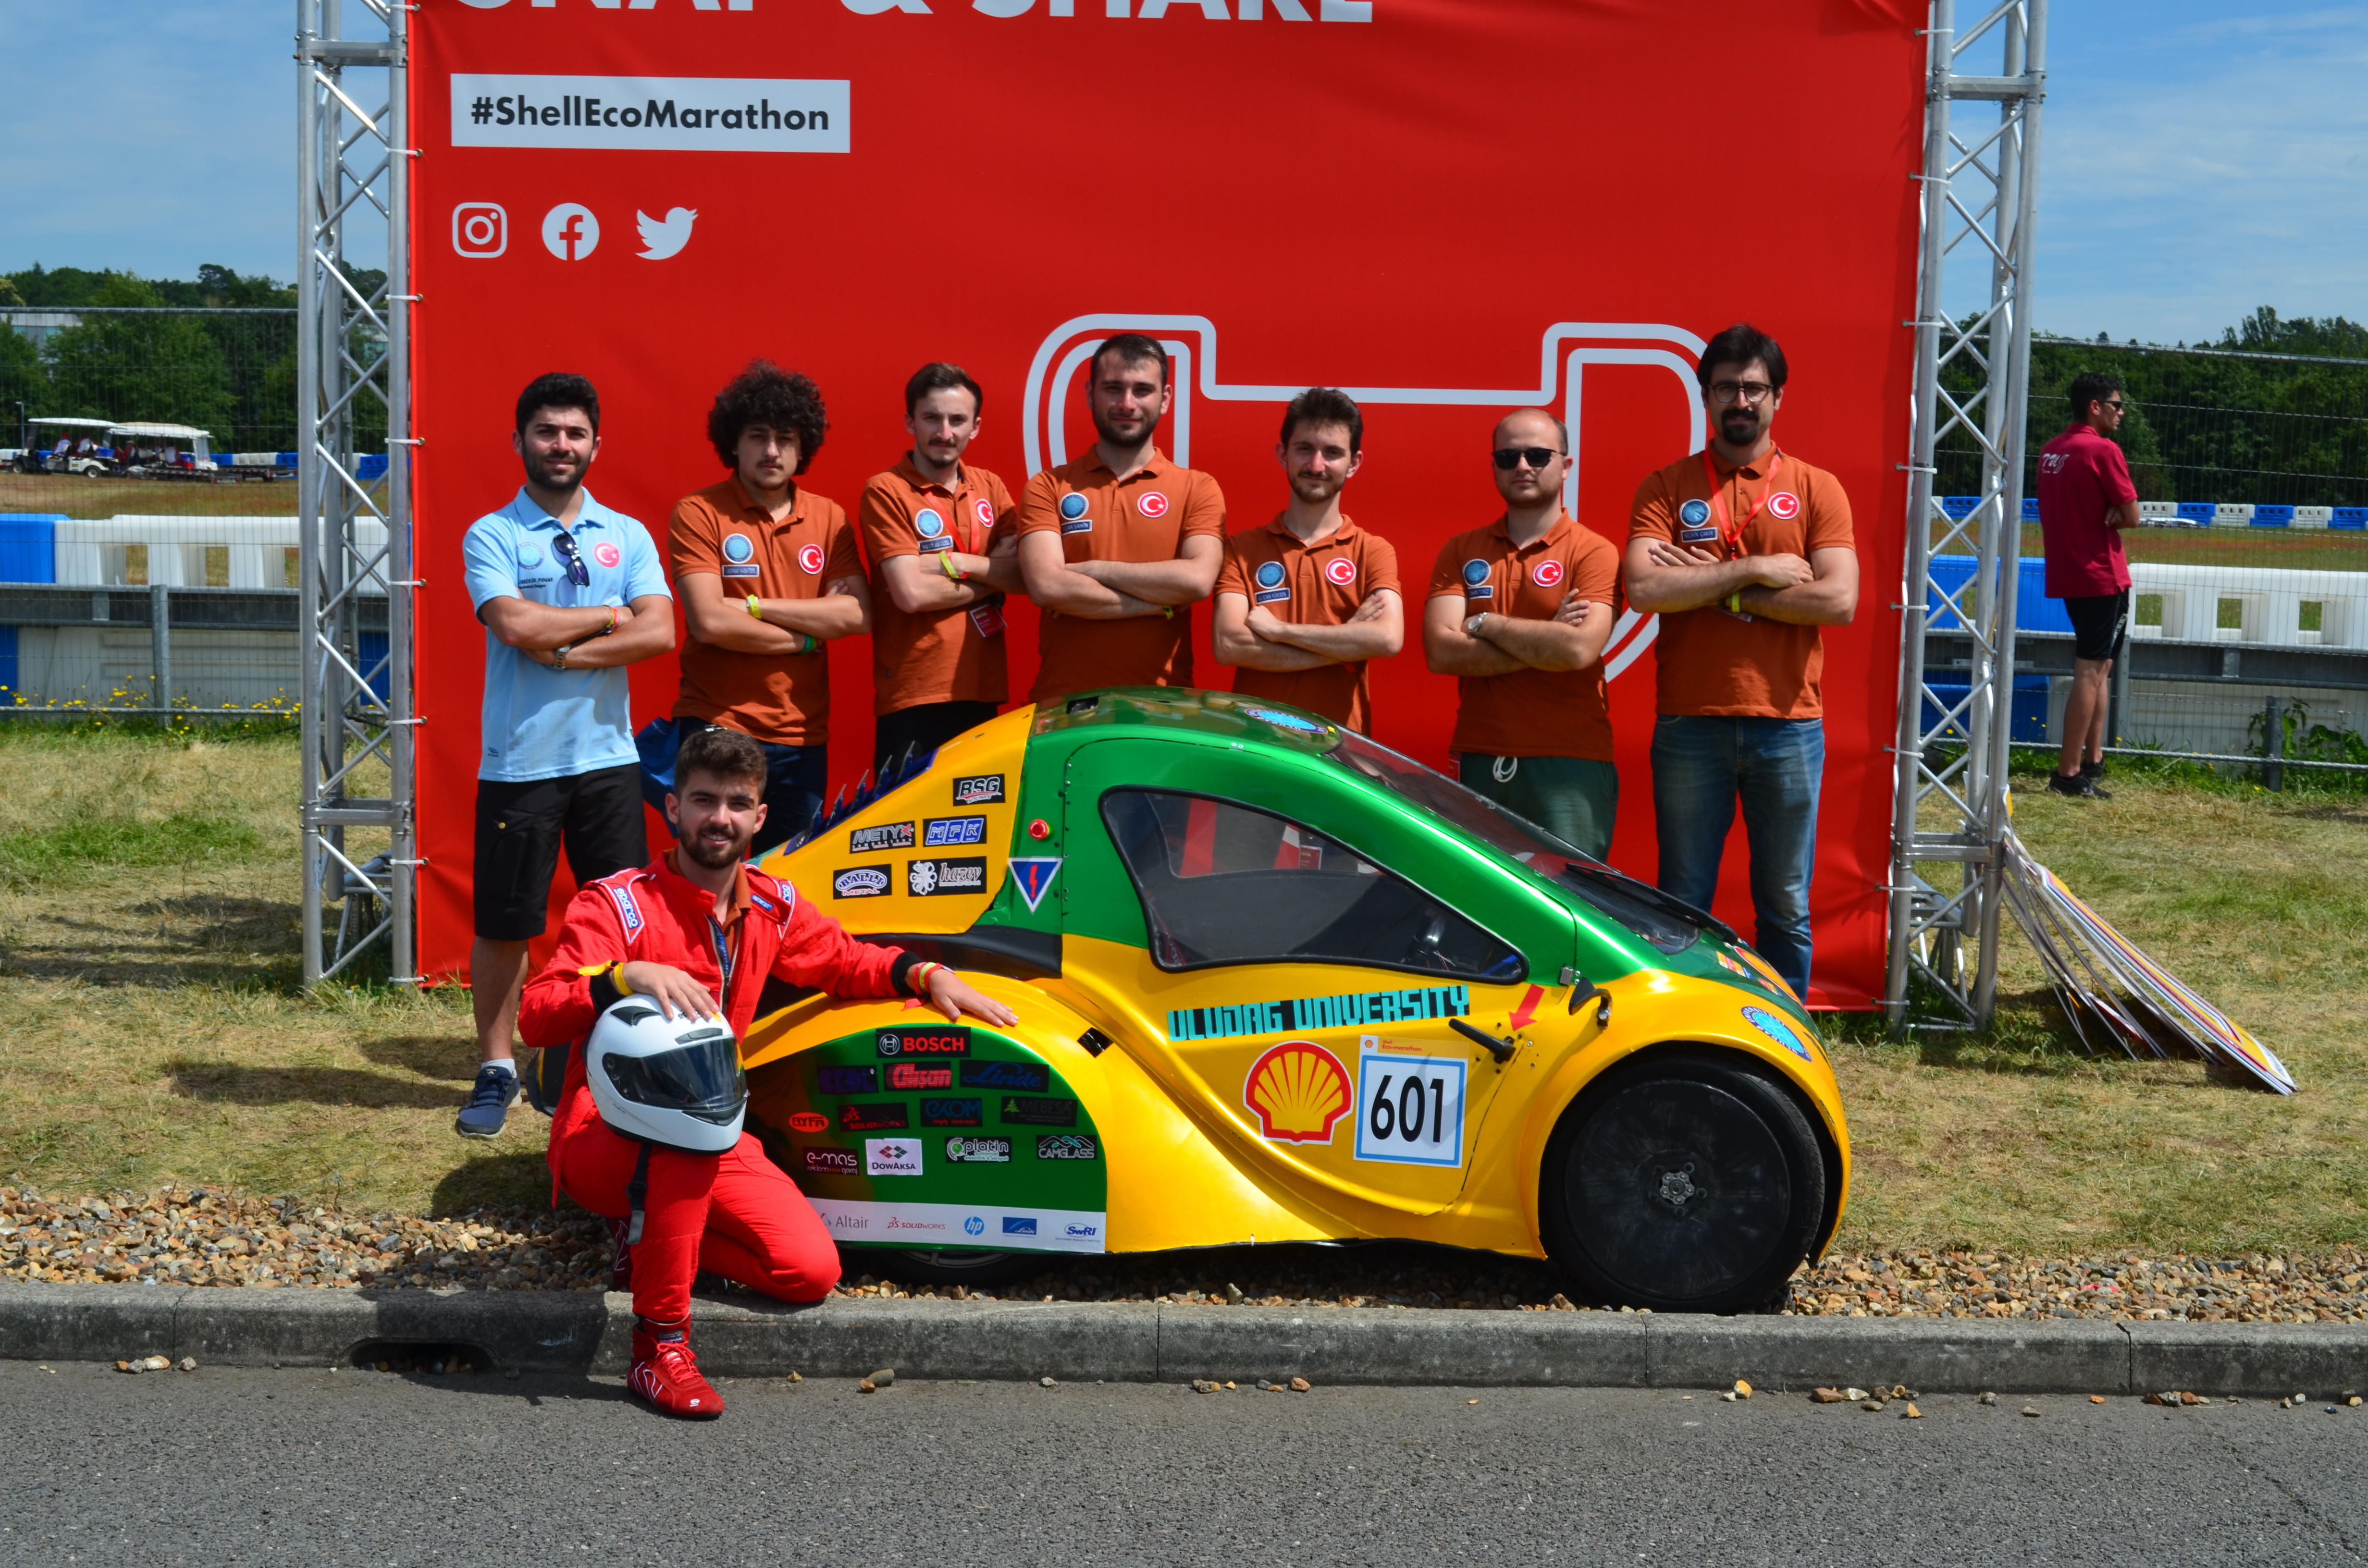 <p>Bursa Uludağ University Machinery Group (UMAKIT) students, once again sponsored by BSG Auto Parts was able to reach the award.</p>

<p>140 teams from 28 countries took place in Shell eco-Marathon Europe 2019 in London and once again Team UMAKİT became Turkey's pride in Technical Innovation Award.</p>

<p>The team became the European champion in the City Concept Hydrogen Powered Vehicle category last year, and this year won the second place in the European Technical Innovation Award.</p>

<p>In addition, UMAKIT team became the 6th most efficient vehicle in Europe with a score of 120 km / m ^ 3 in the efficiency competition within hydrogen powered vehicles.</p>